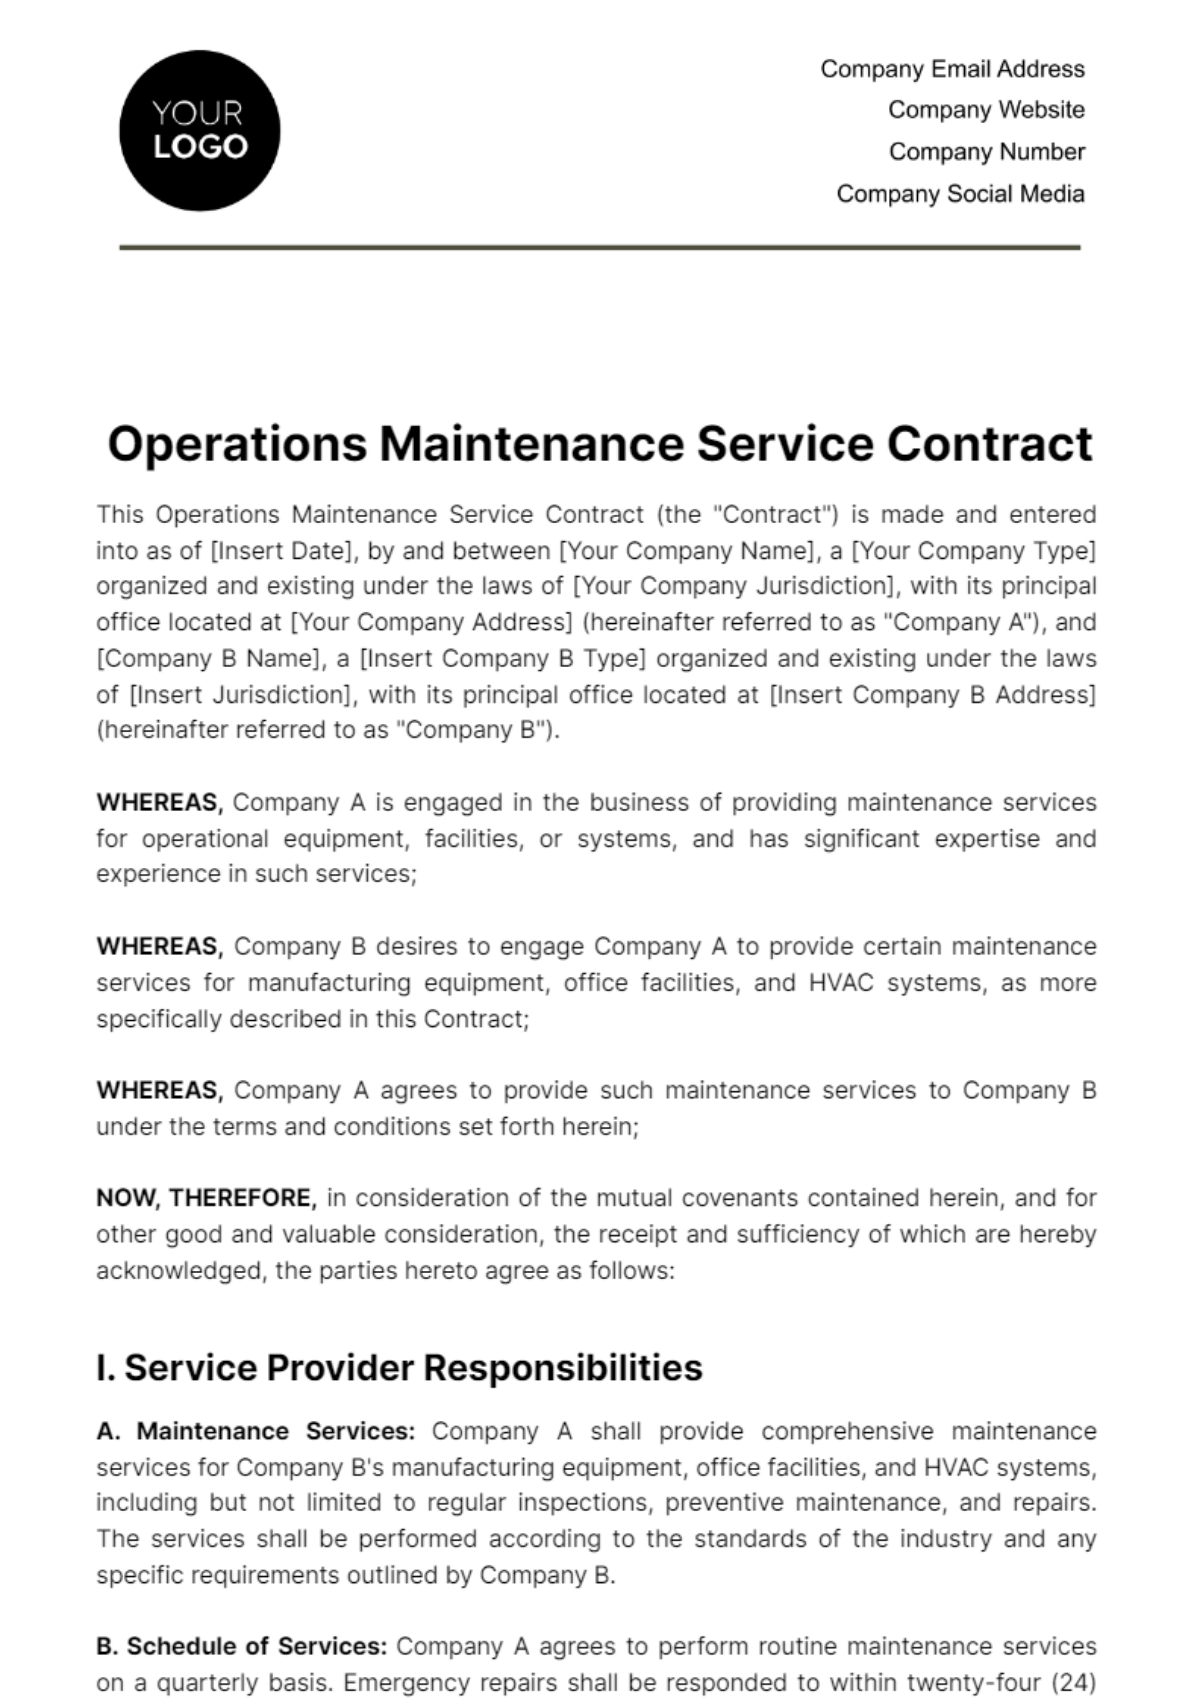 Operations Maintenance Service Contract Template